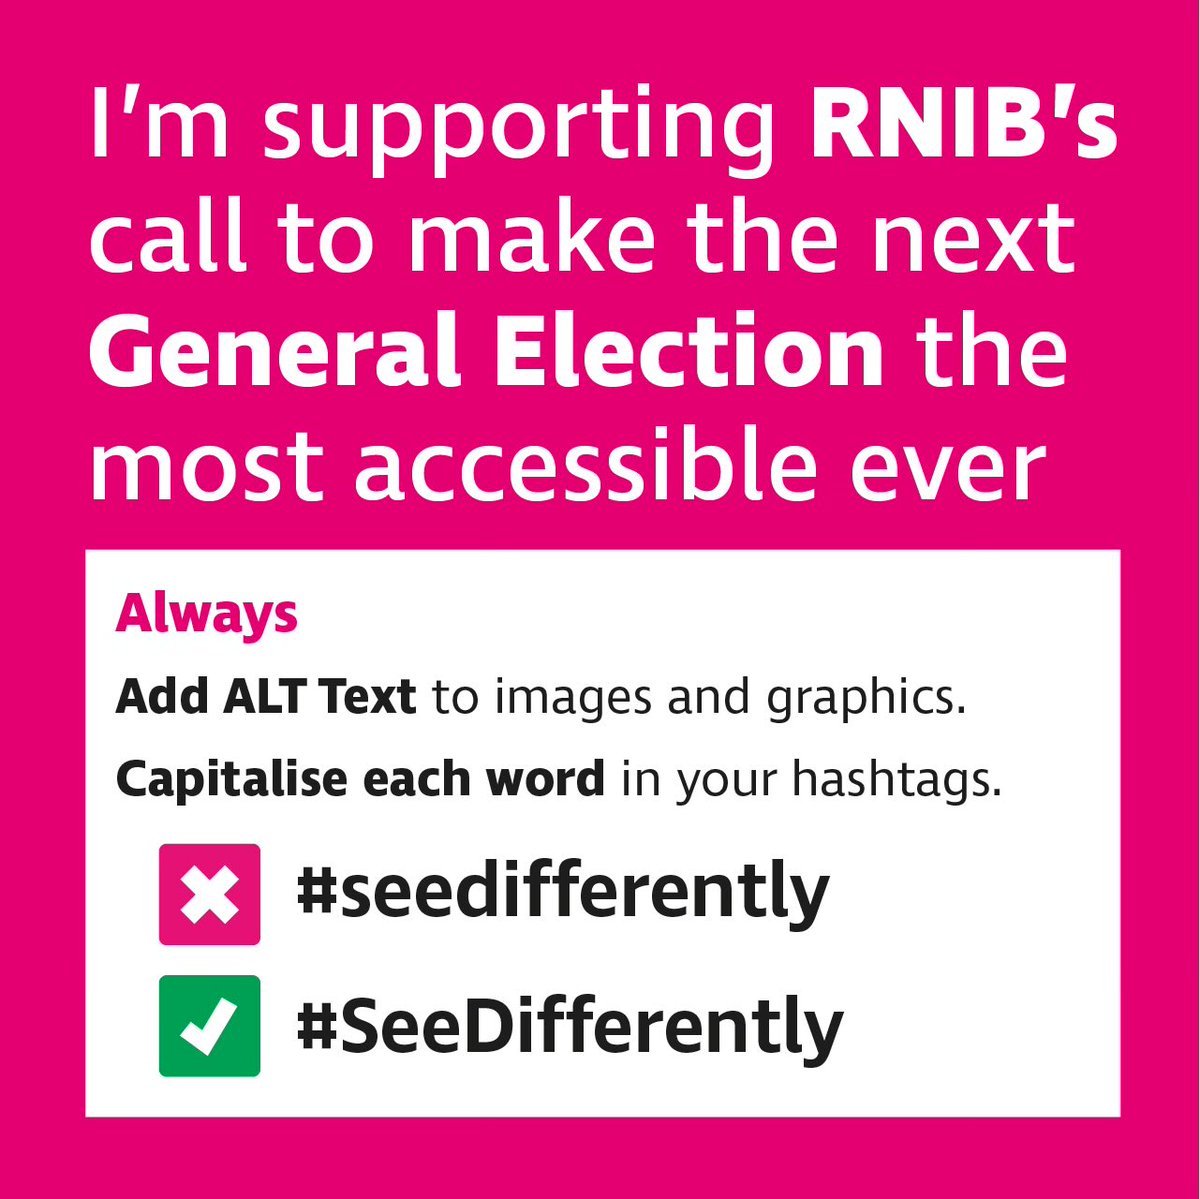 I am supporting @RNIB_Campaign’s call to make #GE24 the most accessible ever. Join us and #AddAltText to your pictures & capitalise your #Hashtags #AltTextDay